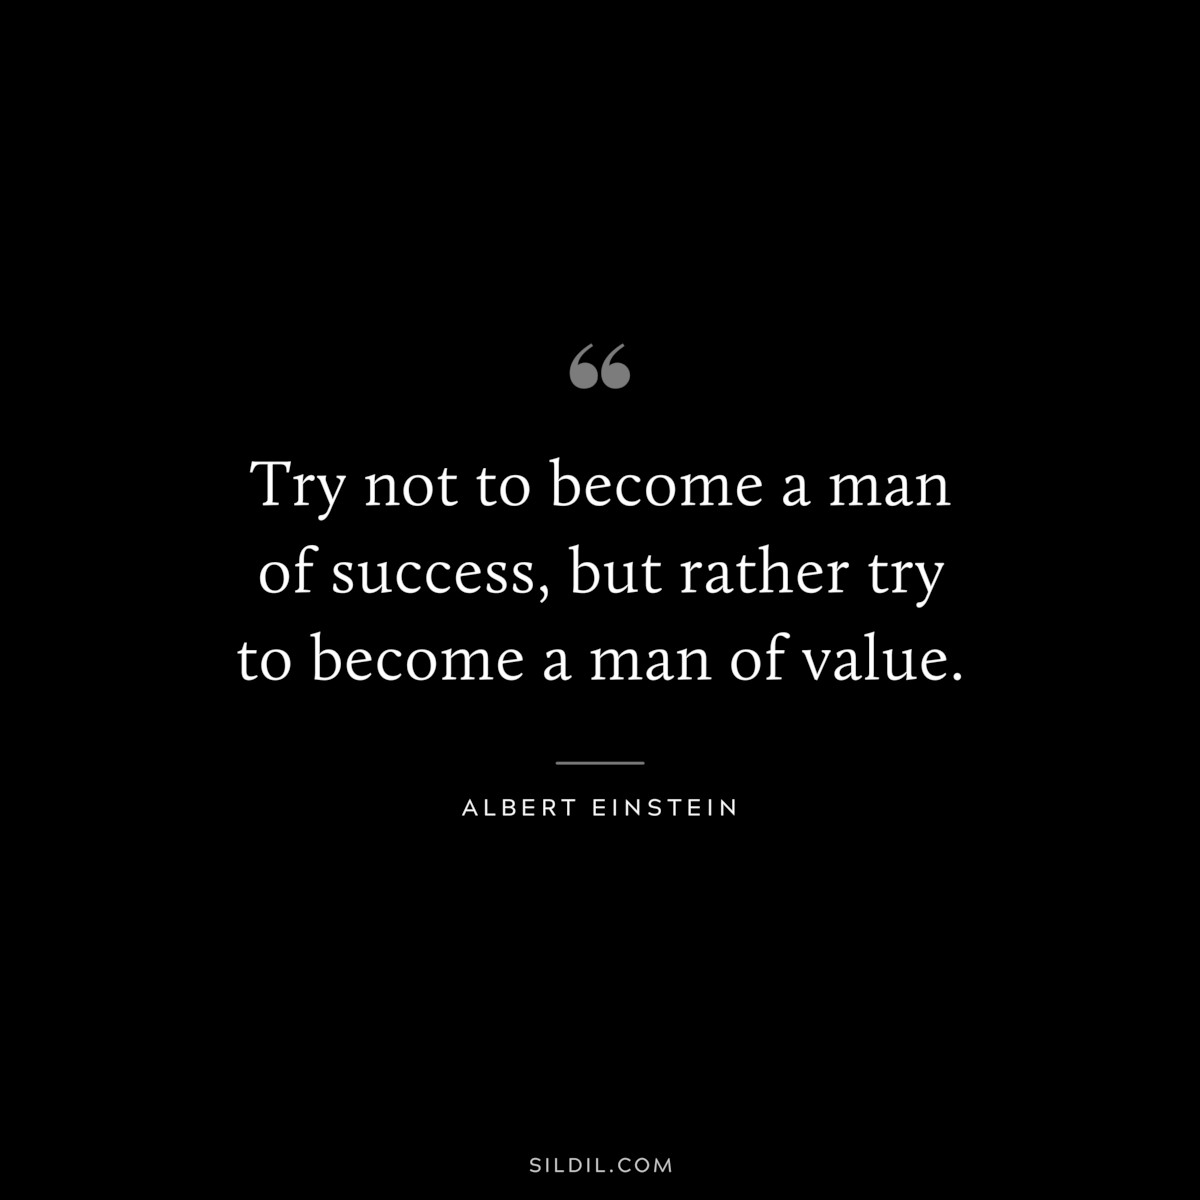 Try not to become a man of success, but rather try to become a man of value. ― Albert Einstein